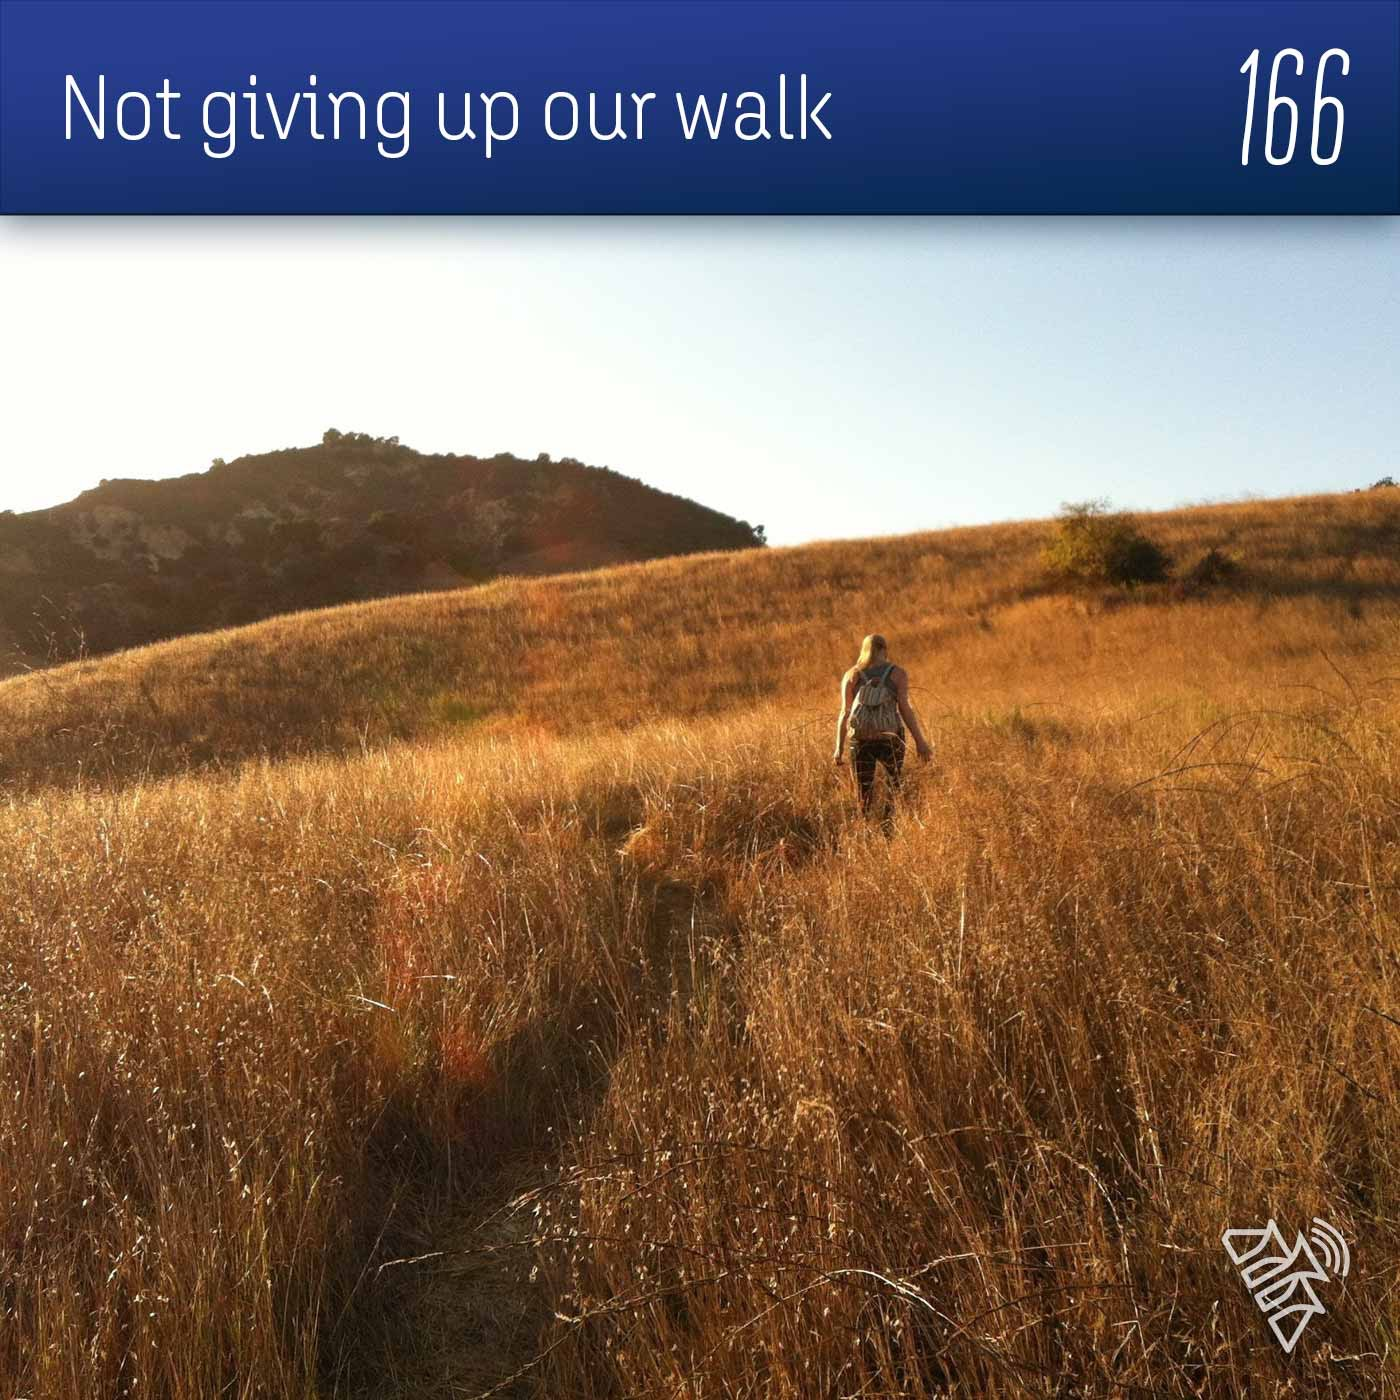 Not giving up our walk in the Lord - Pr Rex Haese - 166